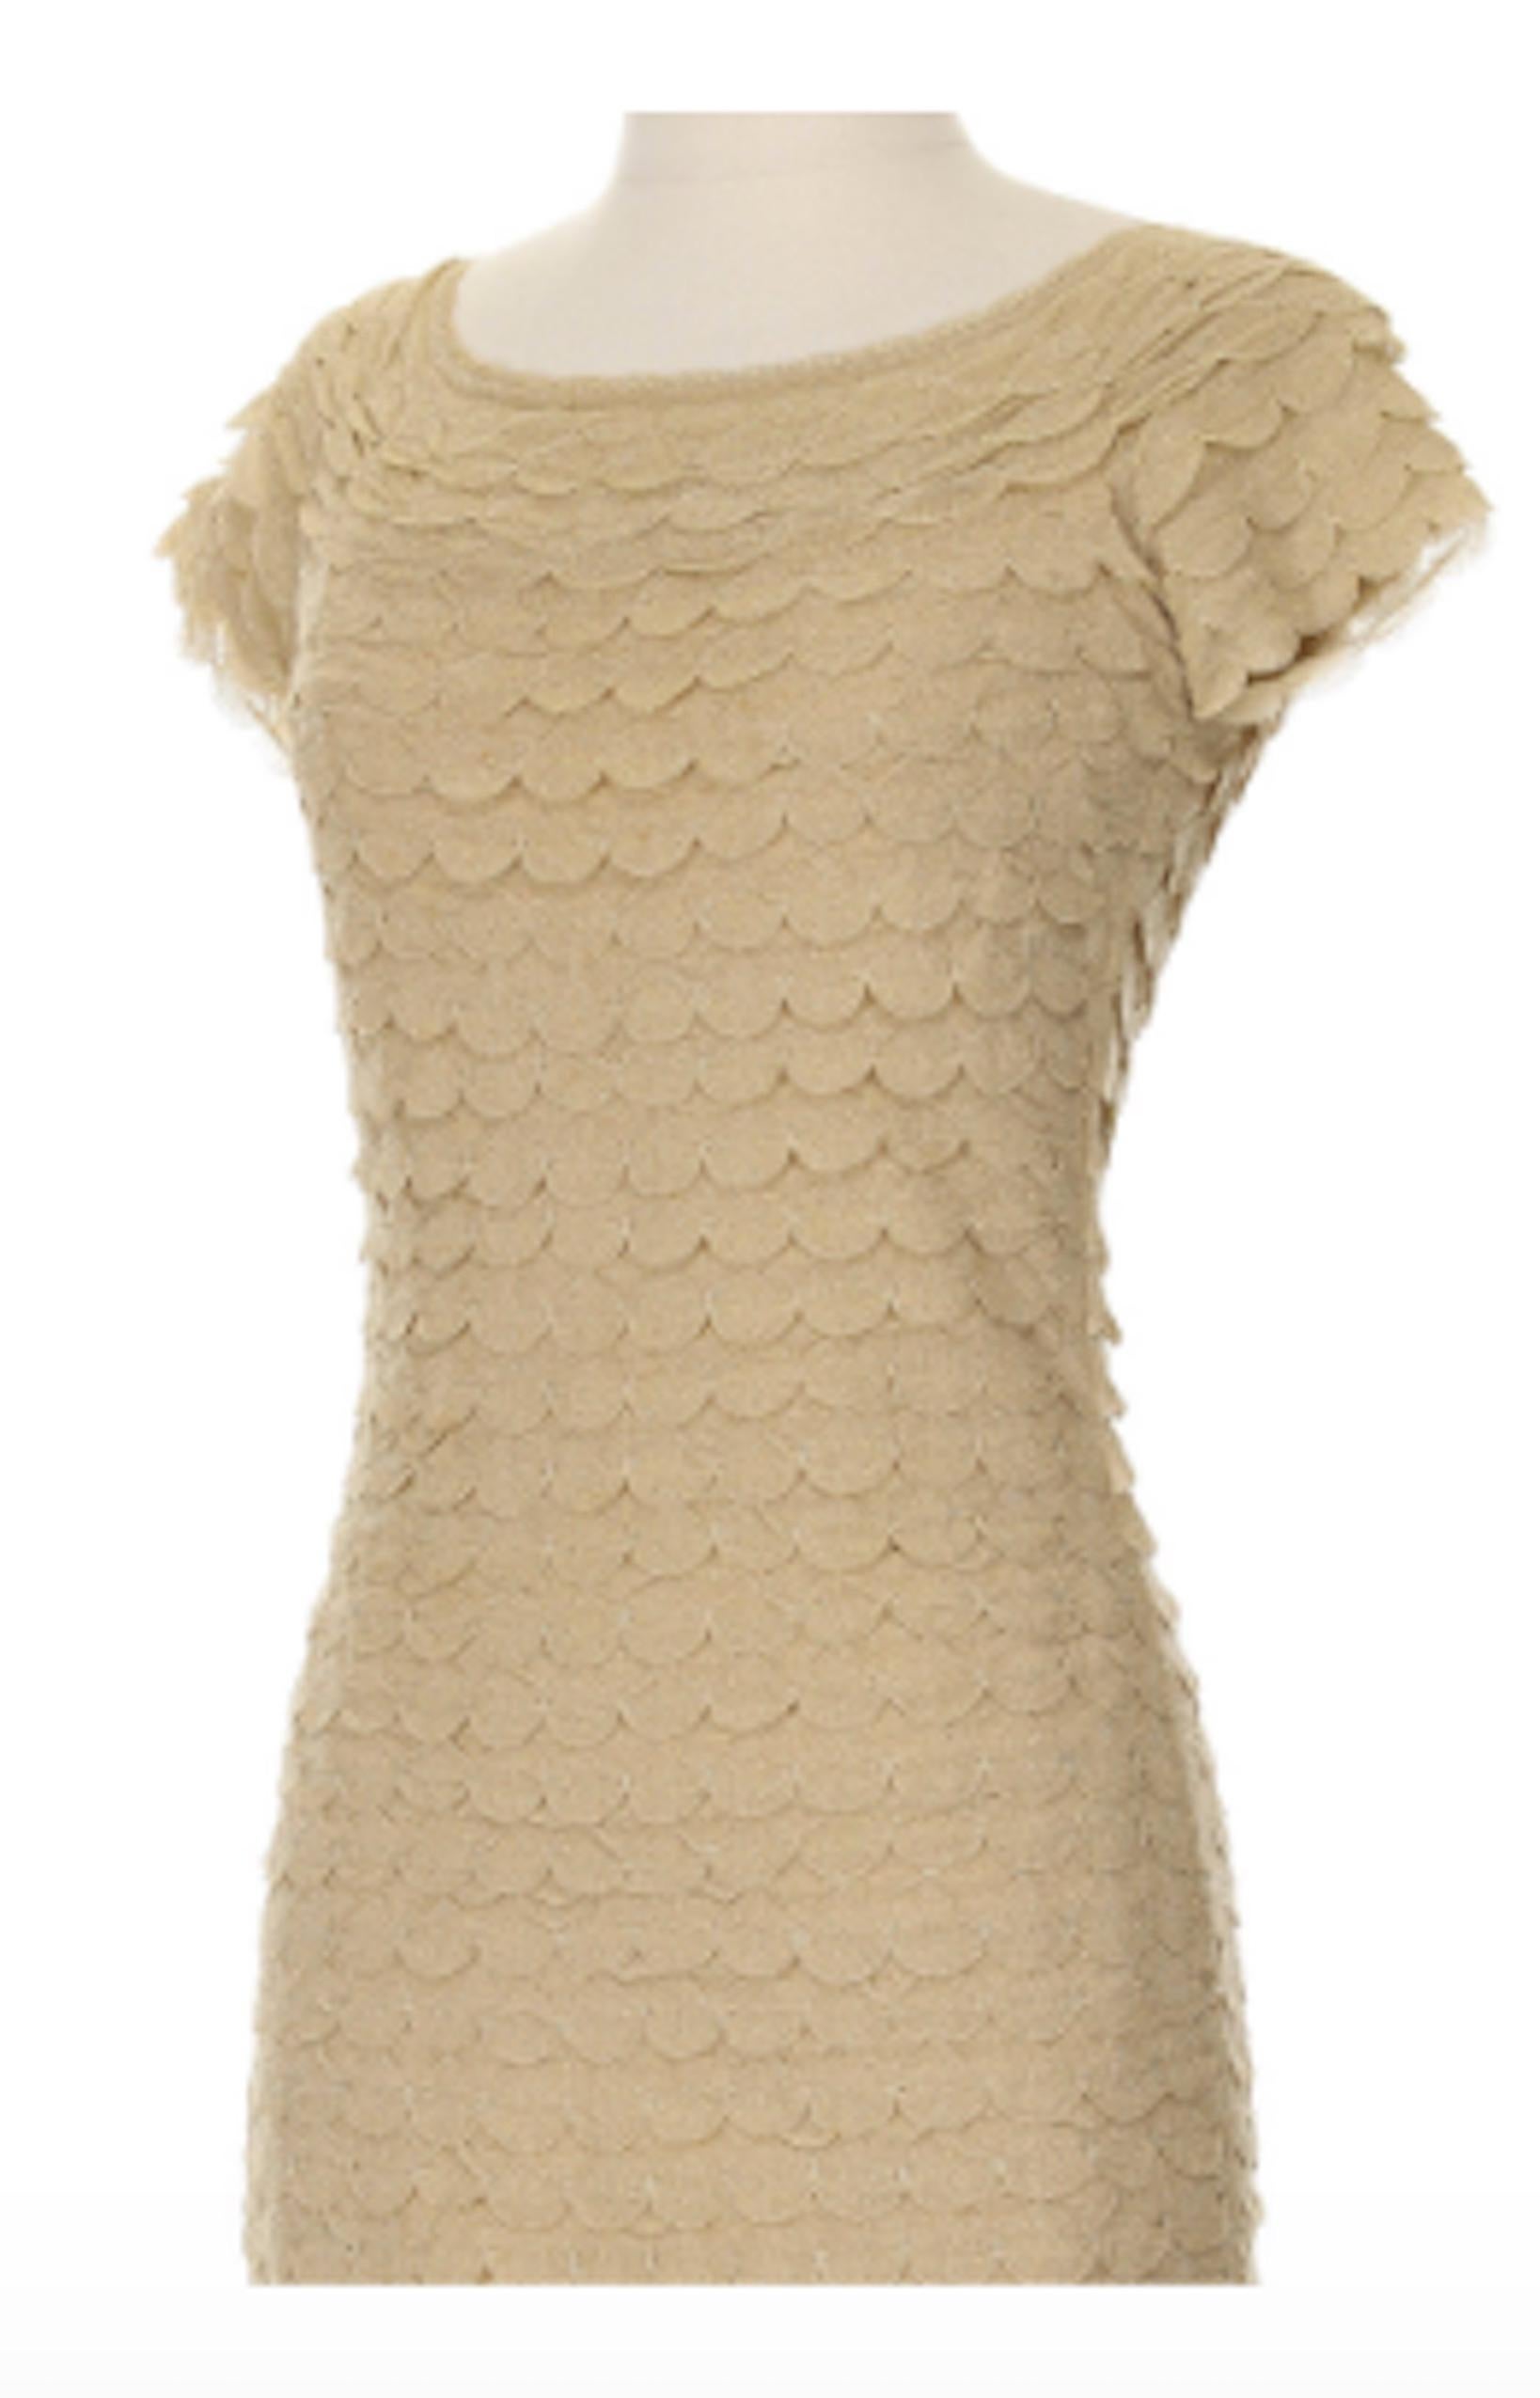 Christian Dior by John Galliano Gold Knit Scalloped Detail Mini Dress, Circa 2000's. Beautiful gold metallic knit mini dress with layered scalloped details. Can be worn on or off the shoulders. A cute little addition to your wardrobe that hugs the